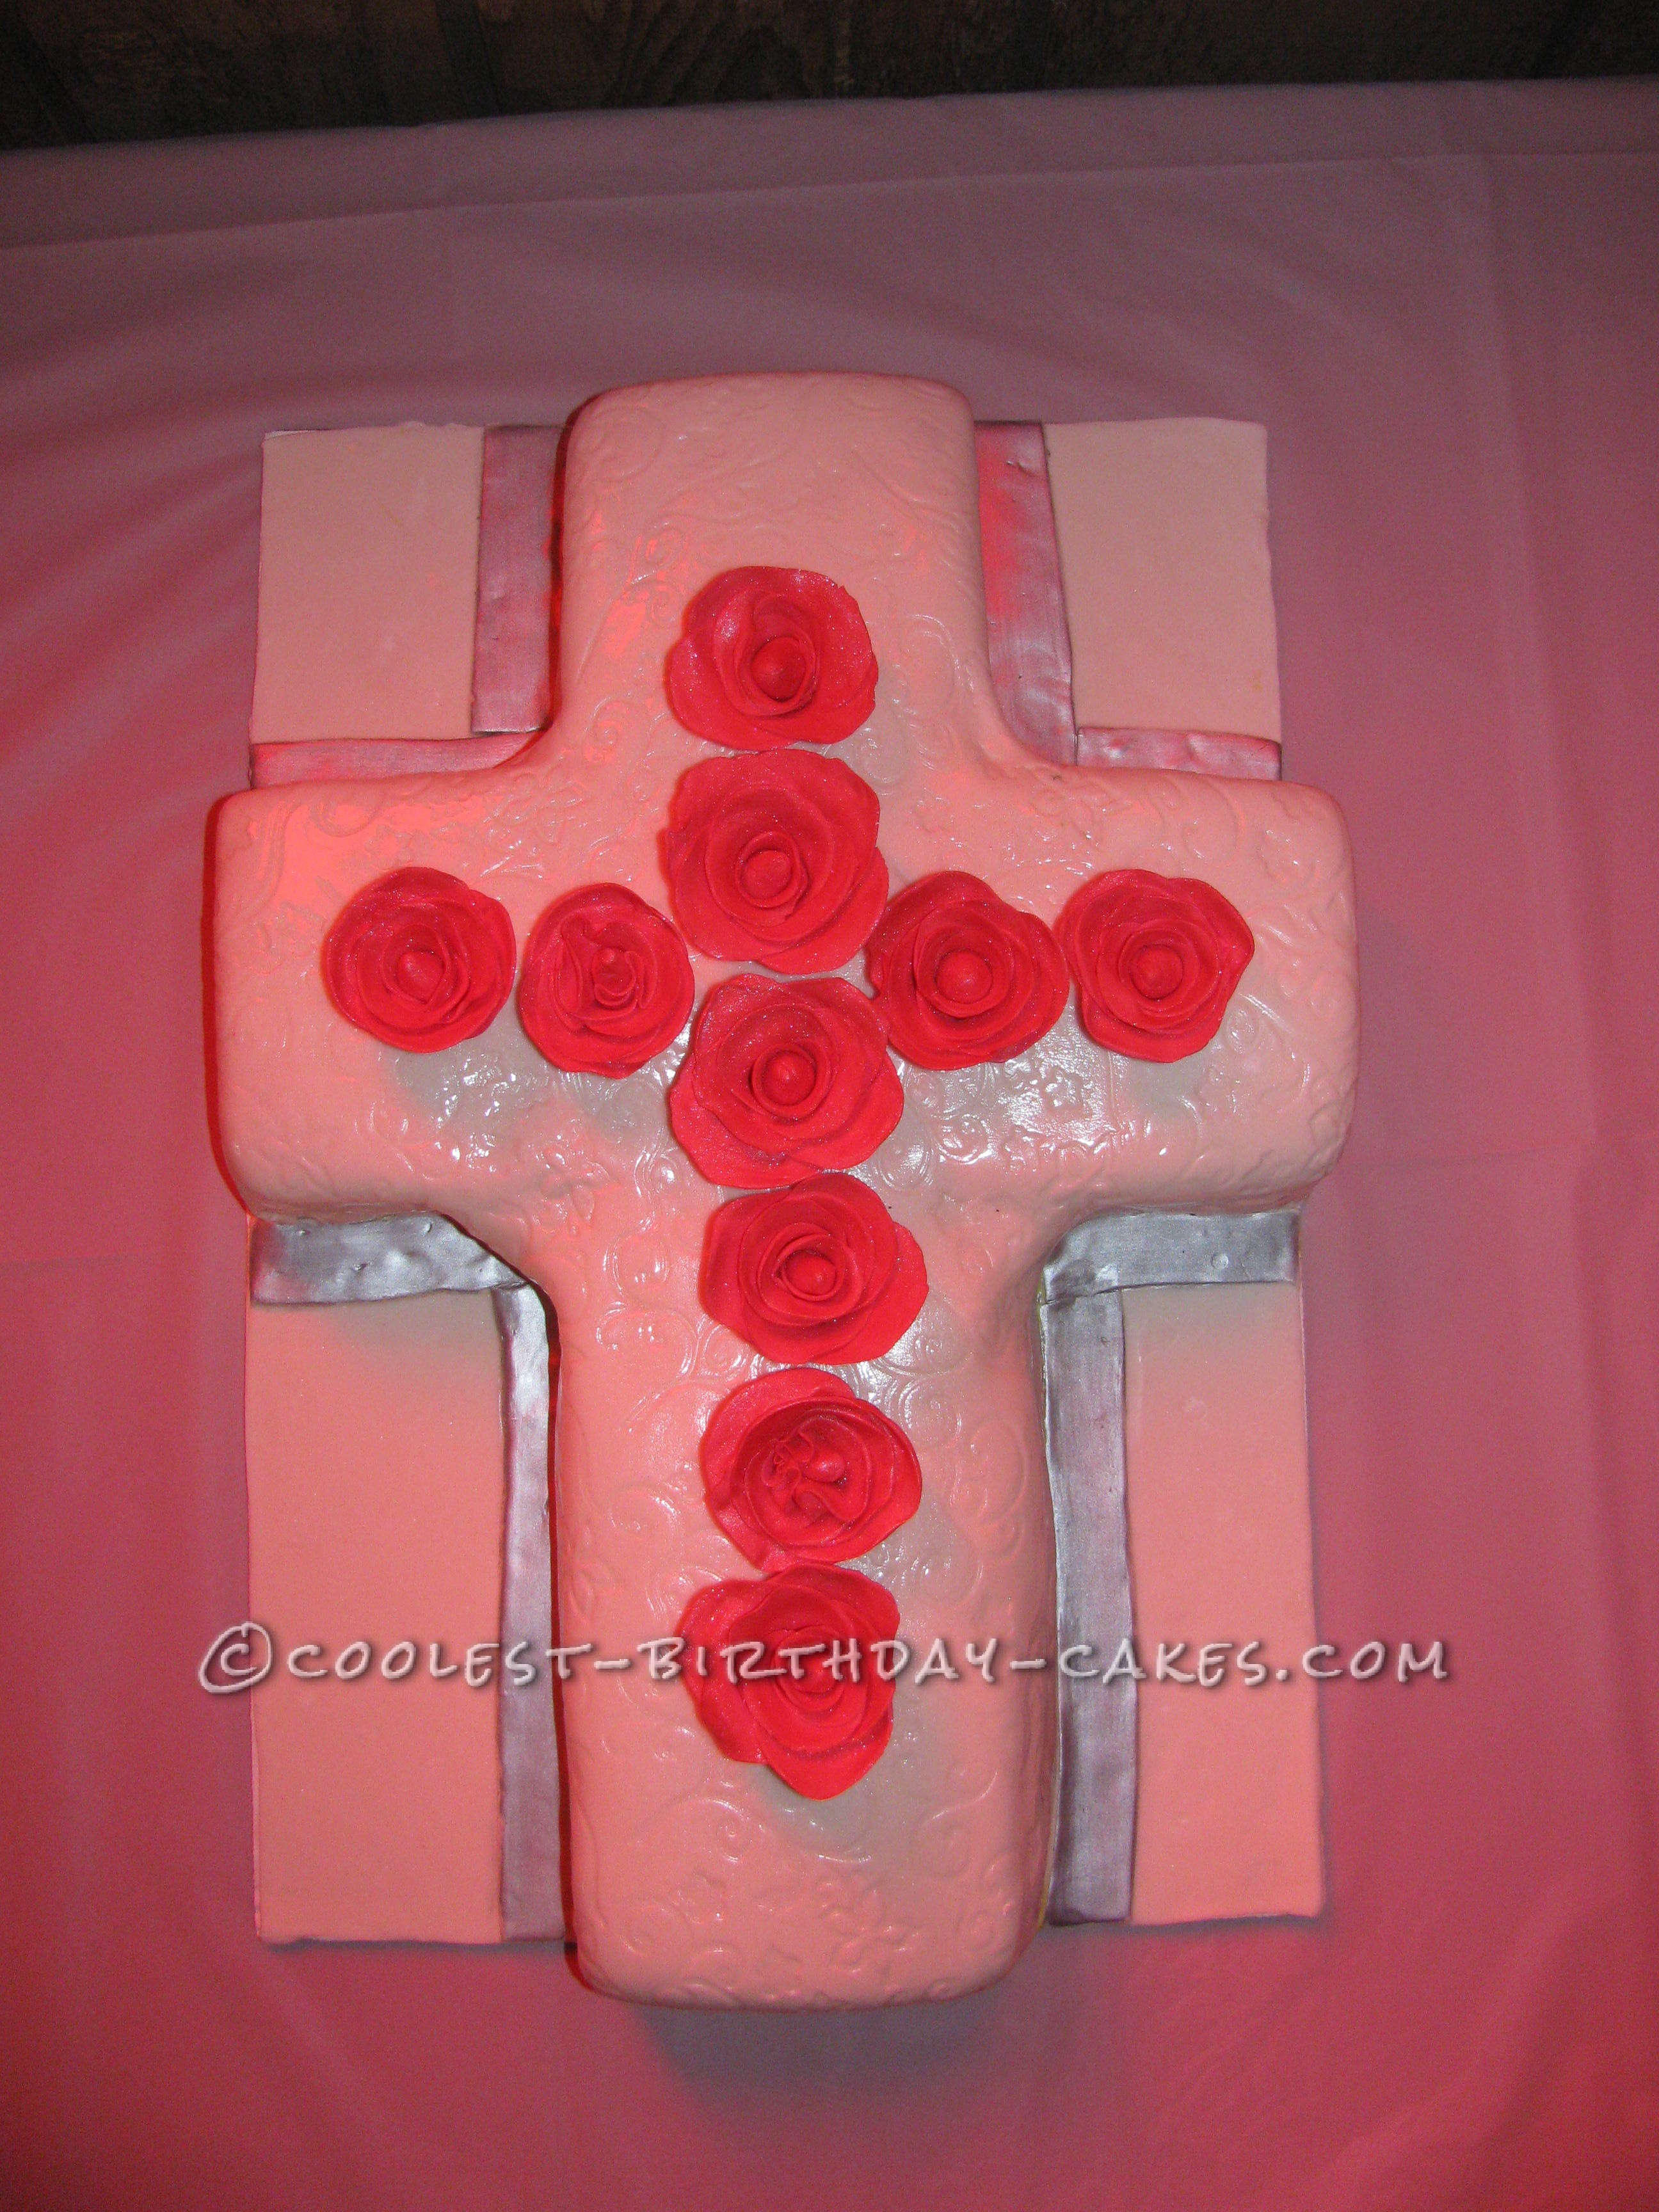 Cross with Roses Cake